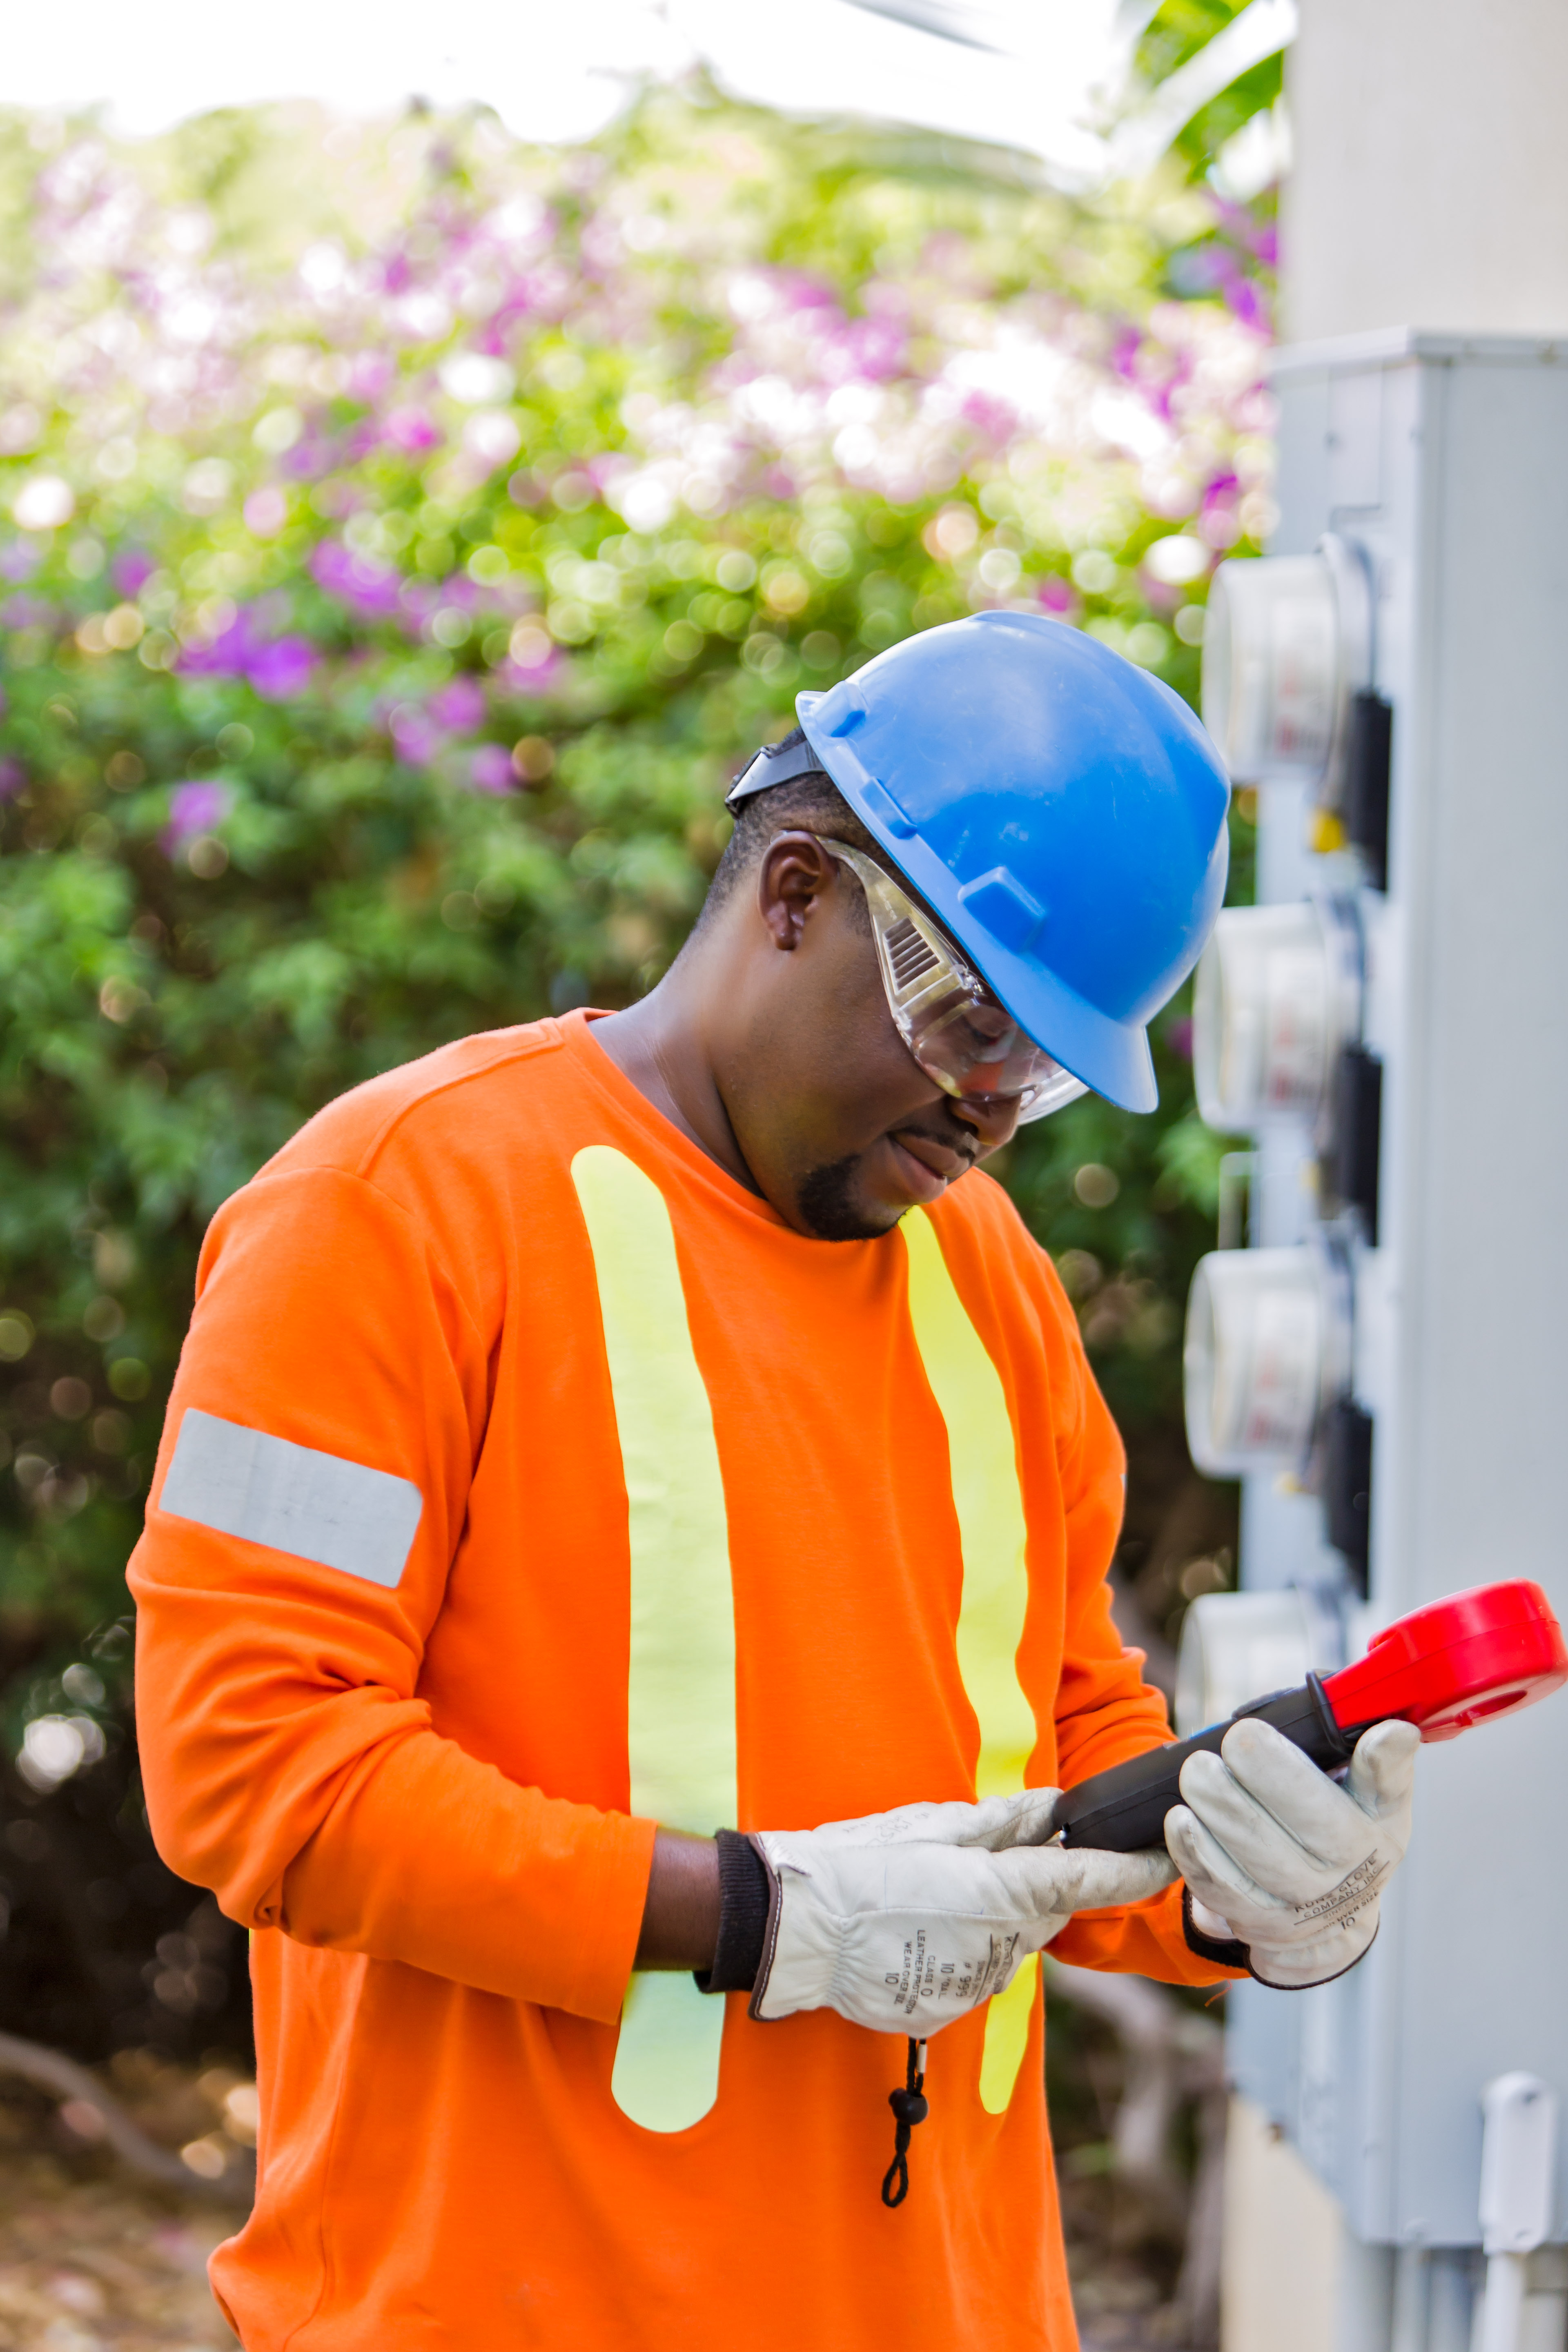 Electrical Inspection Required Before Your Electricity Can Be Reconnected